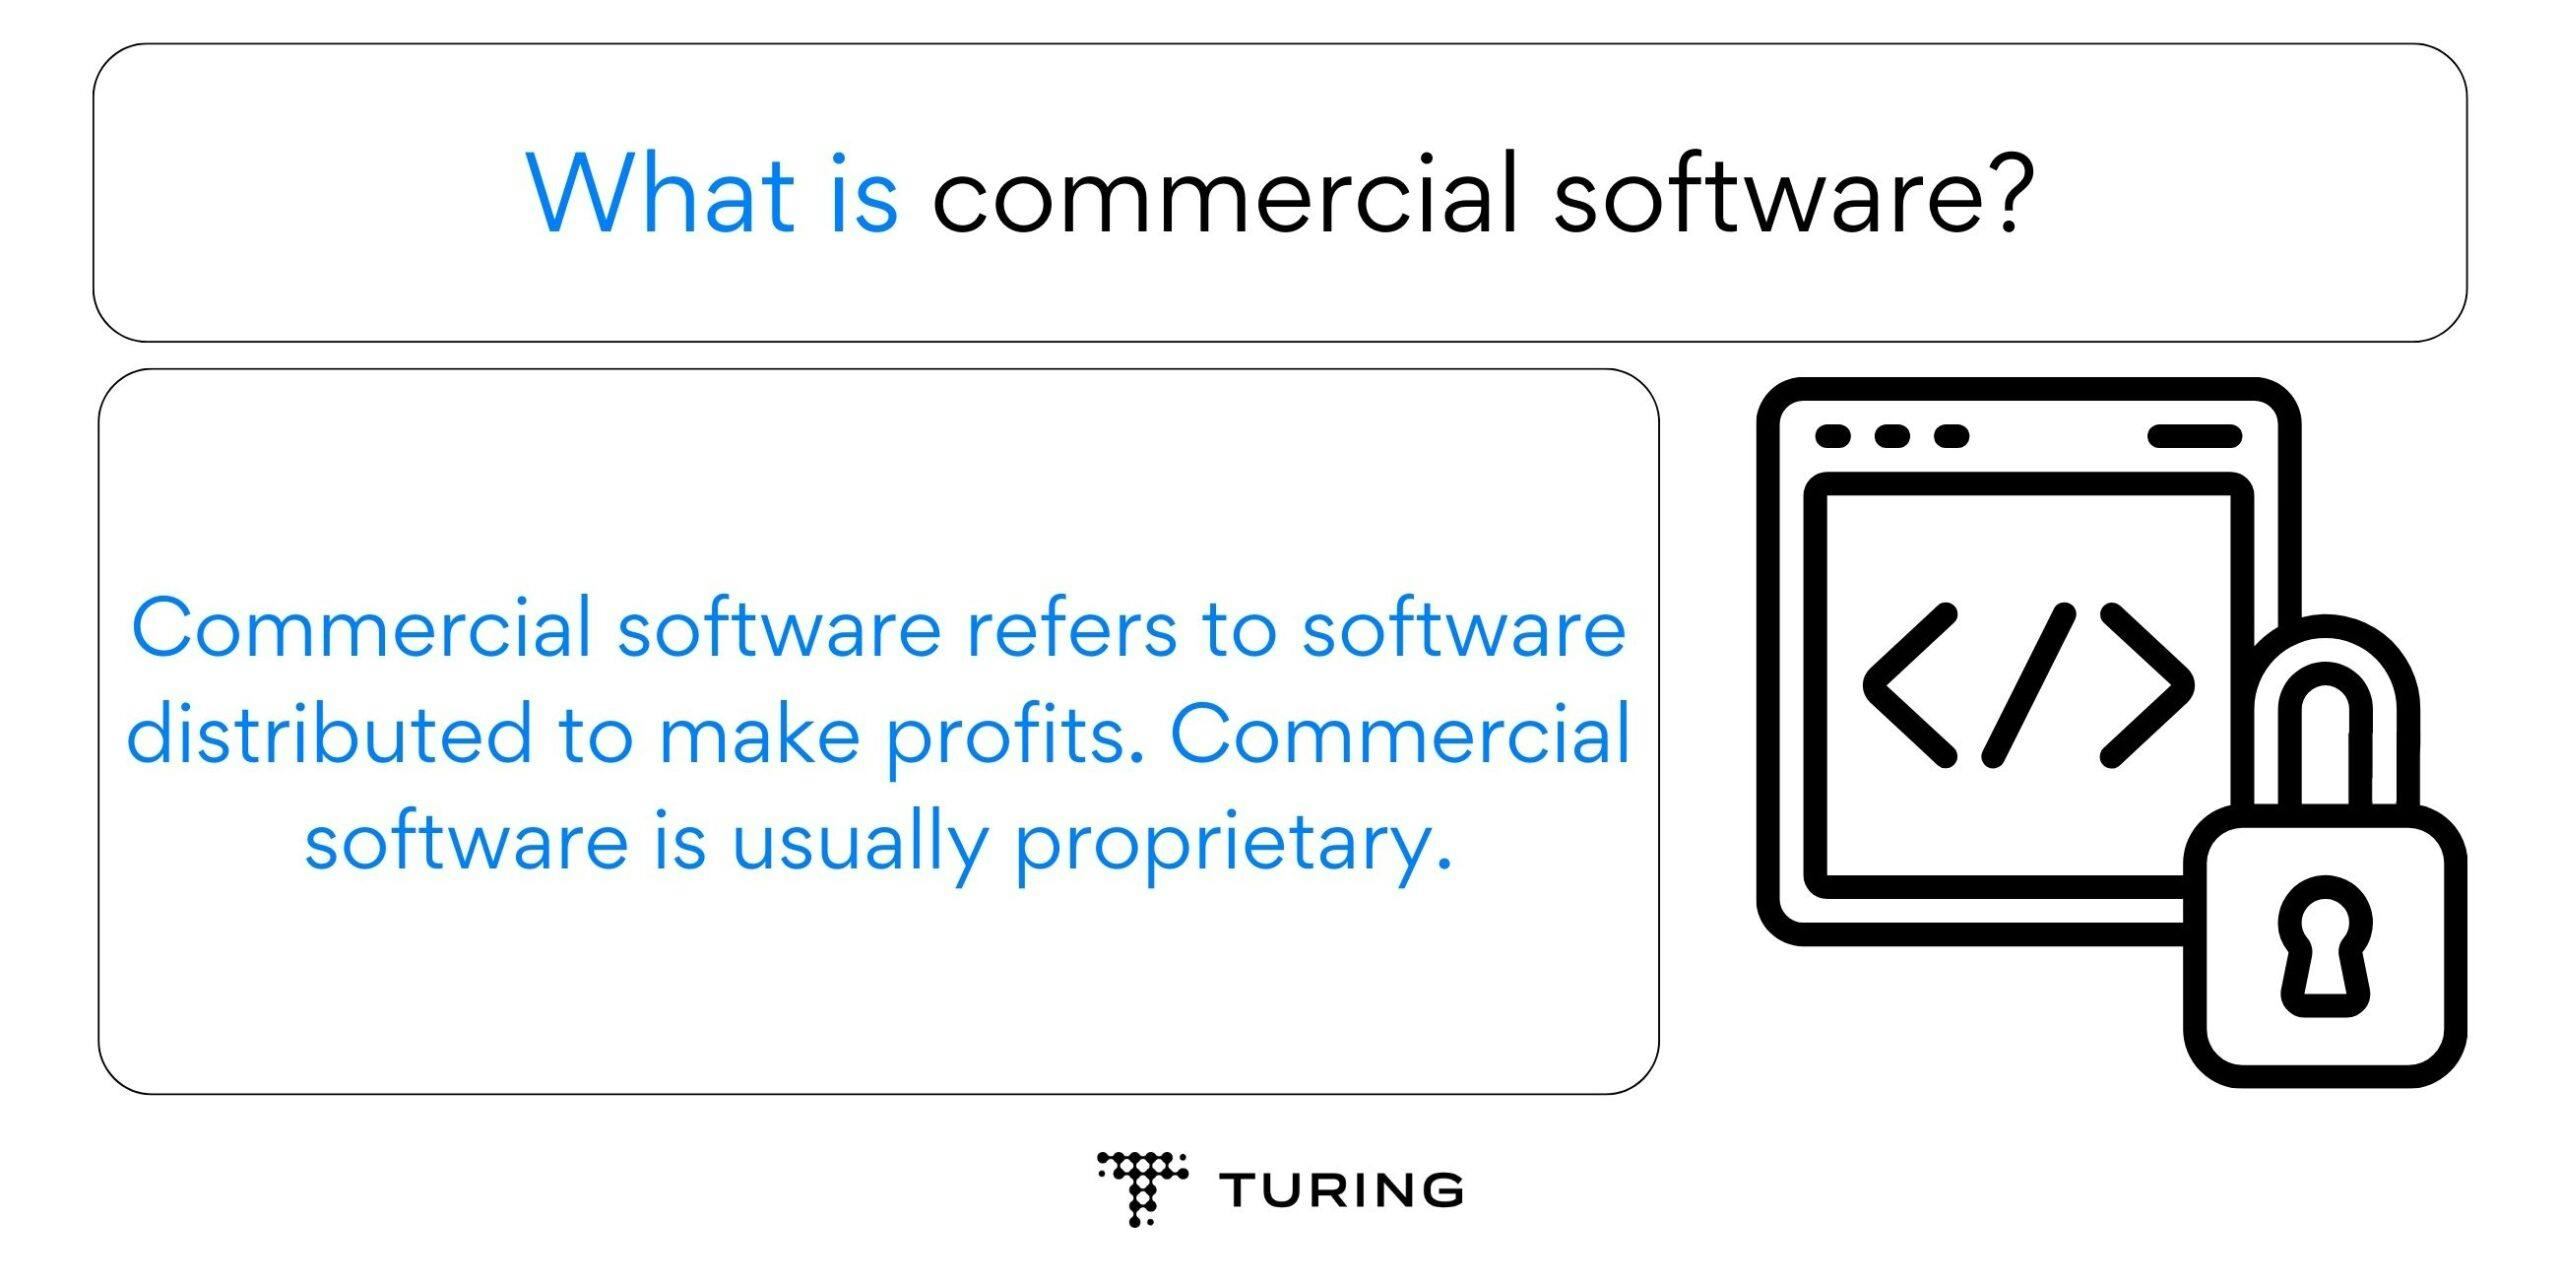 What is commercial software